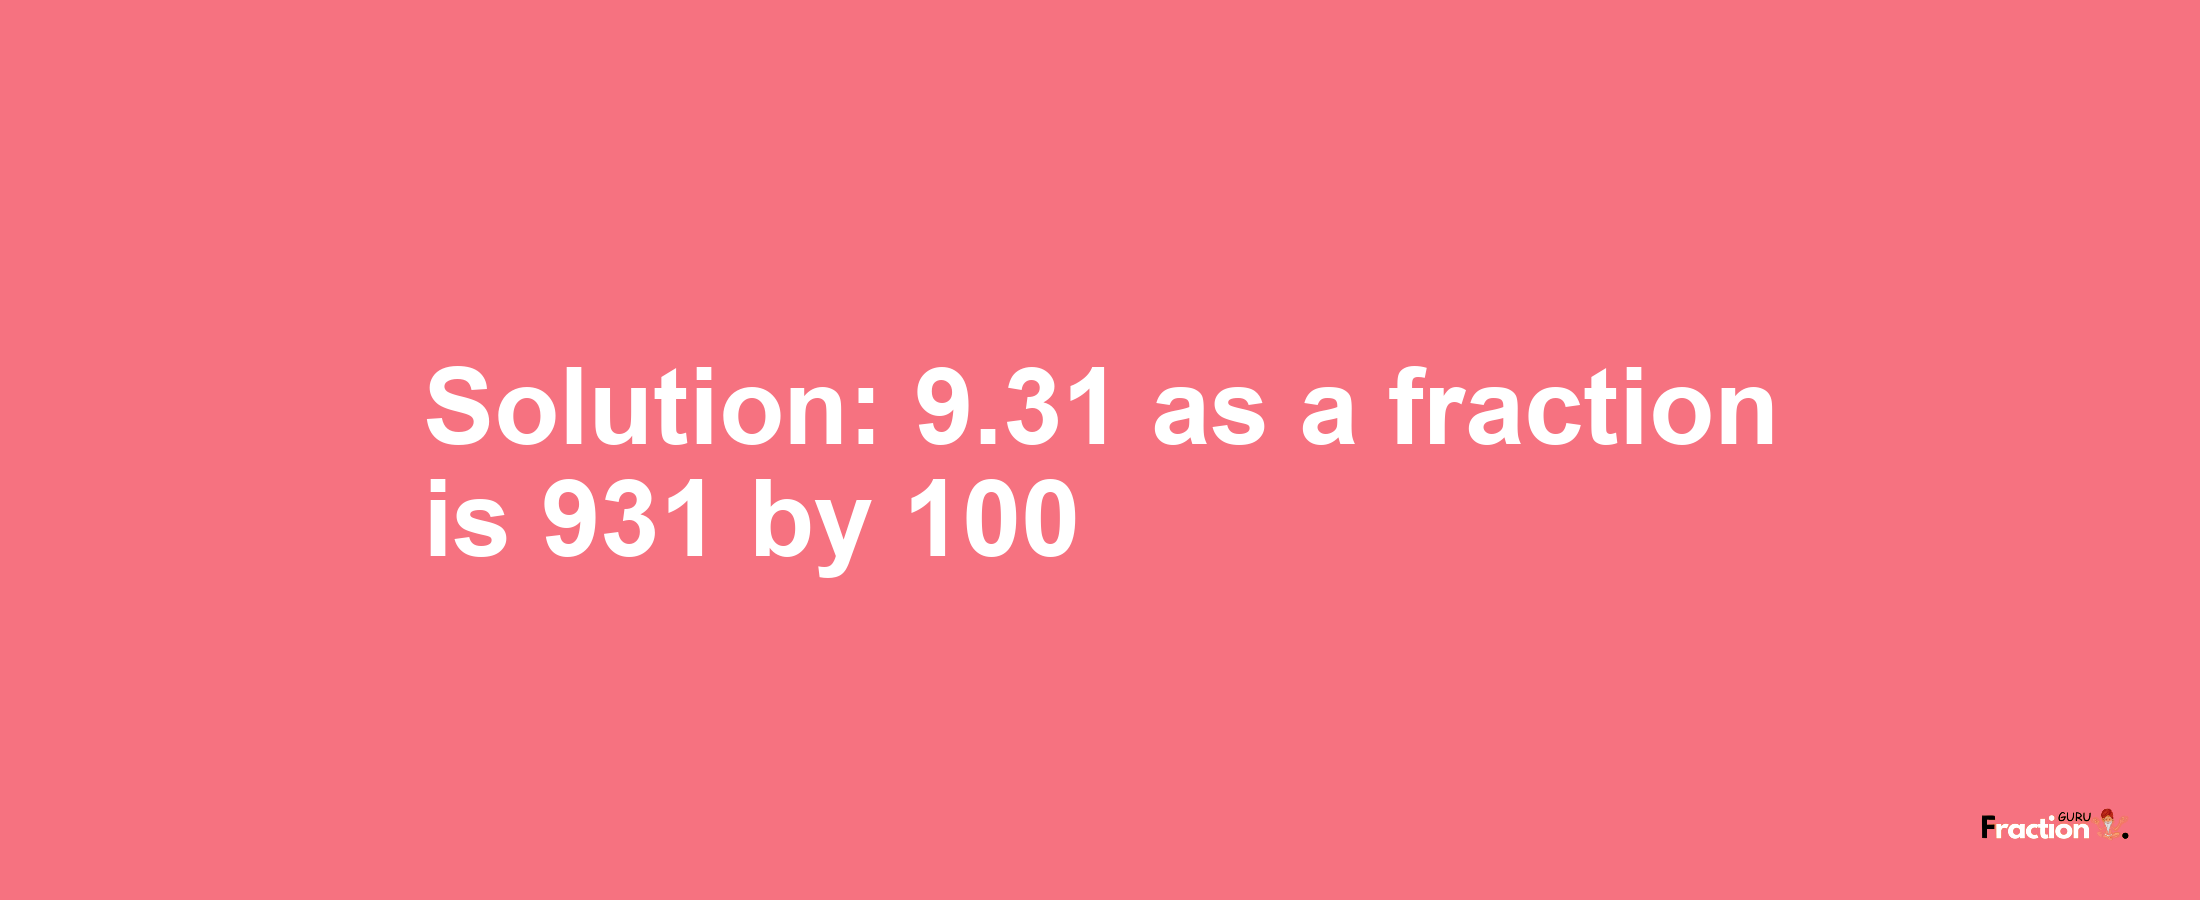 Solution:9.31 as a fraction is 931/100